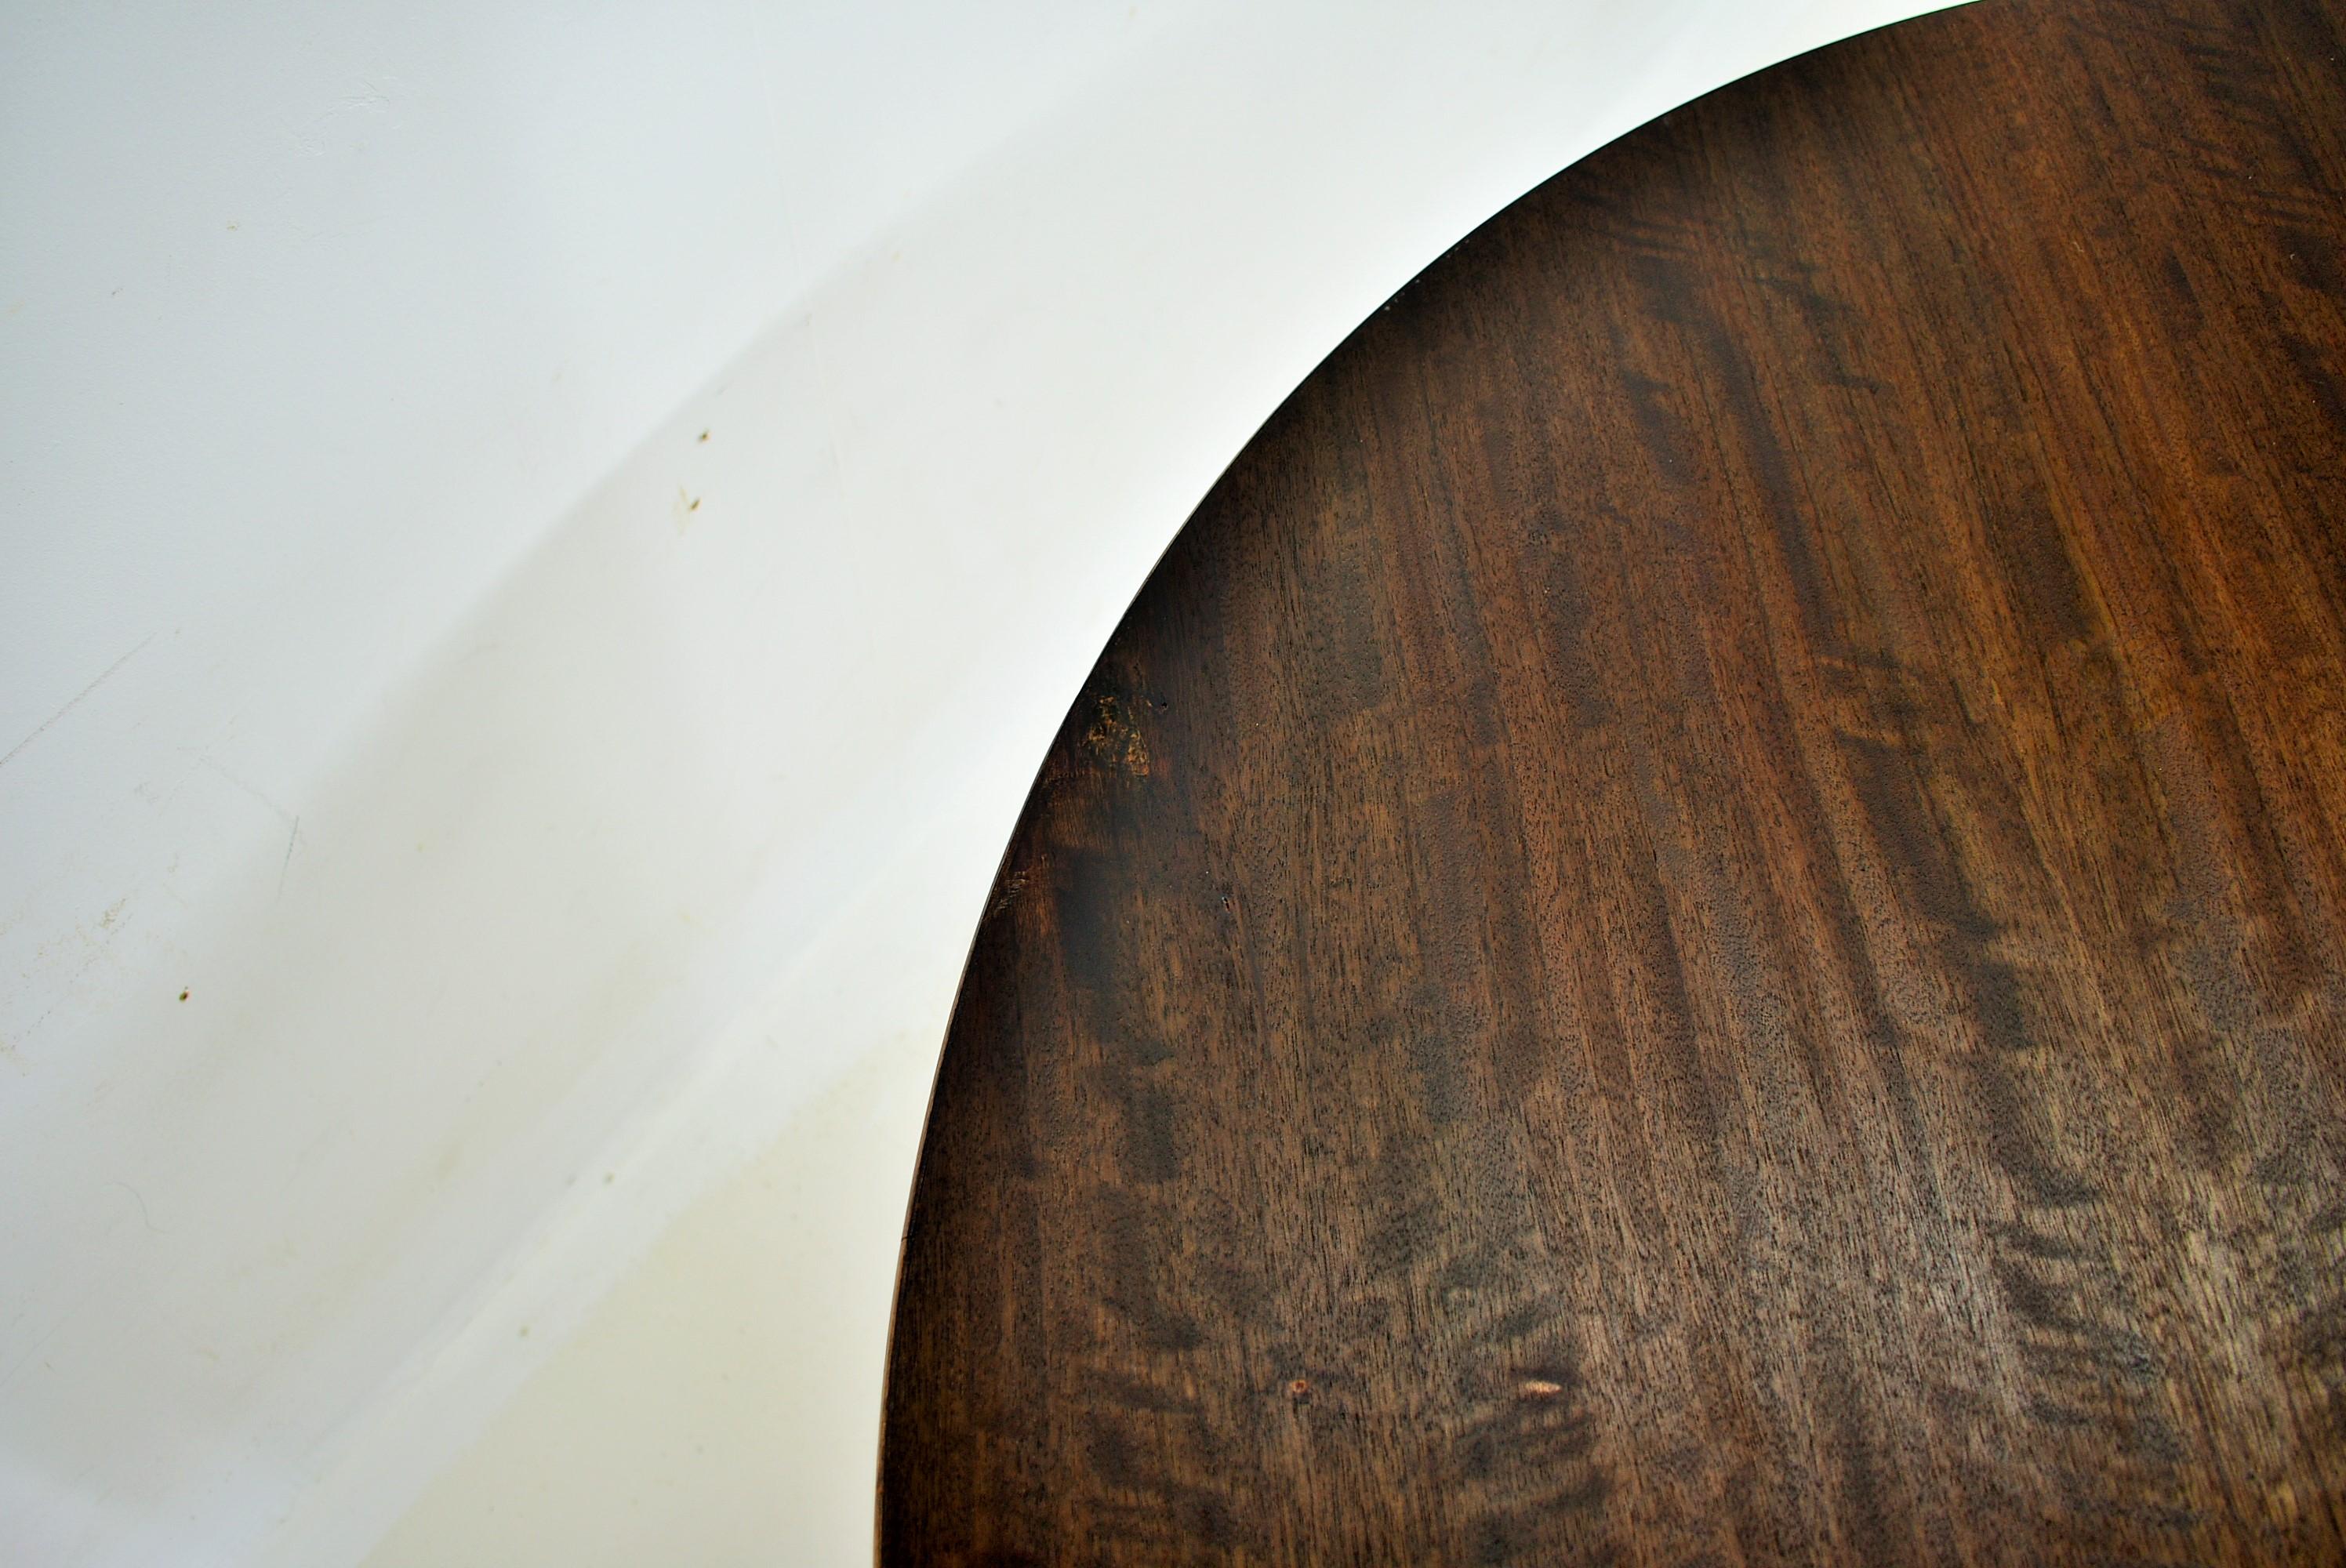 1960s Beech Round Dining Table, Czechoslovakia For Sale 5